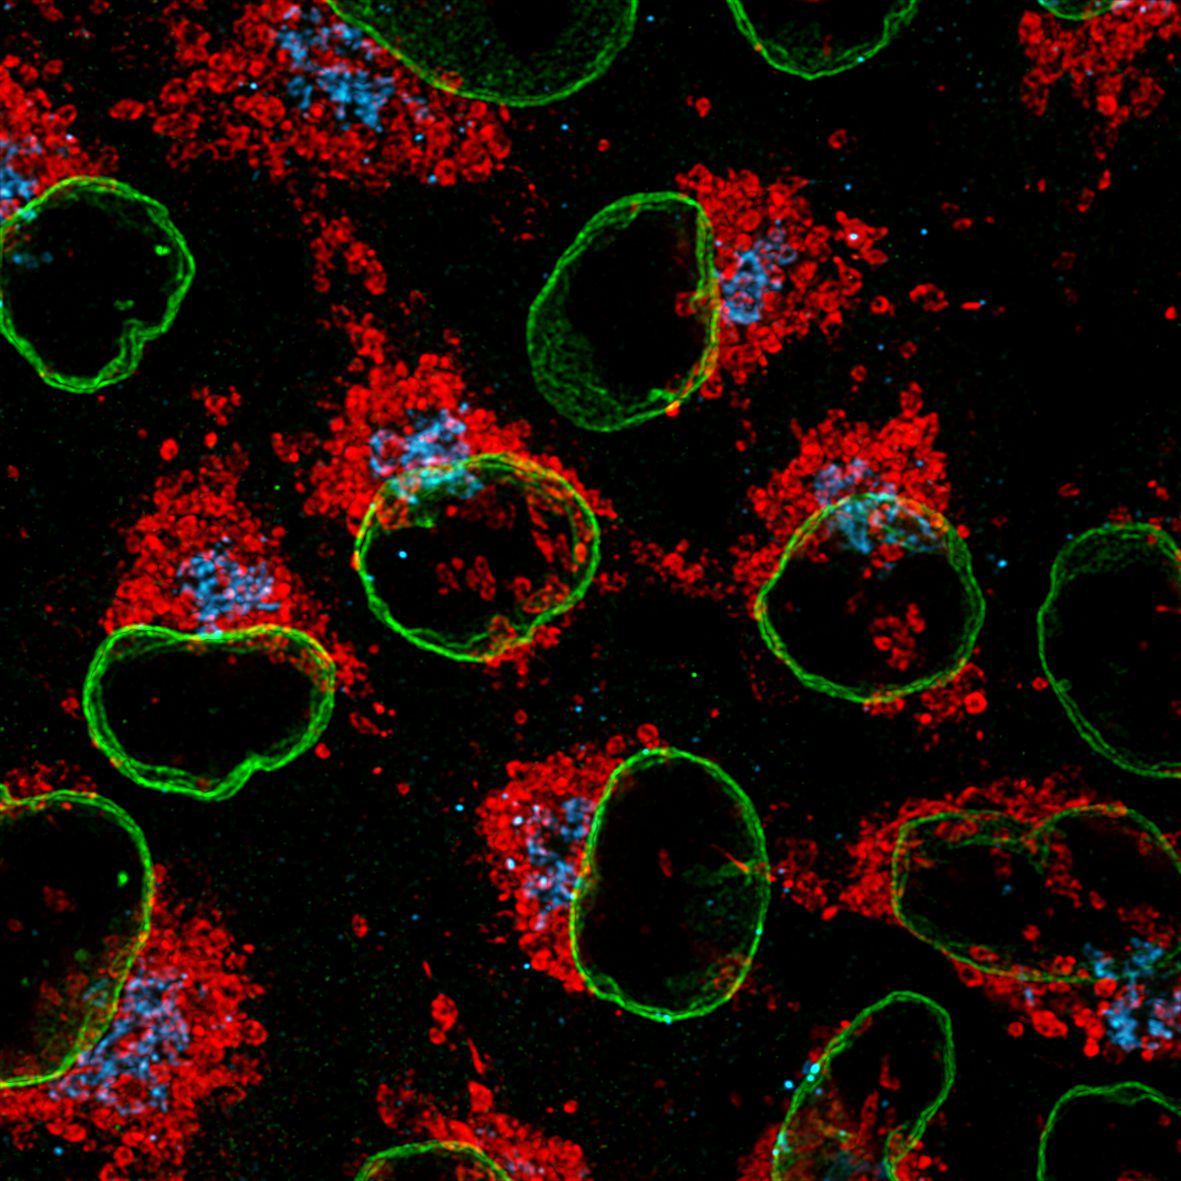 Immunofluorescence of HeLa: PFA-fixed HeLa cells were stained with anti-Lamin B1 (66095-1-Ig) labeled with FlexAble CoraLite® 488 Kit (KFA021, green), anti-HSP60 (66041-1-Ig) labeled with FlexAble CoraLite Plus 550 Kit (KFA022, red) and anti-GORASP2 (66627-1-Ig) labeled with FlexAble CoraLite Plus 650 Kit (KFA023, cyan).​ Confocal images were acquired with a 100x oil objective and post-processed. Images were recorded at the Core Facility Bioimaging at the Biomedical Center, LMU Munich.